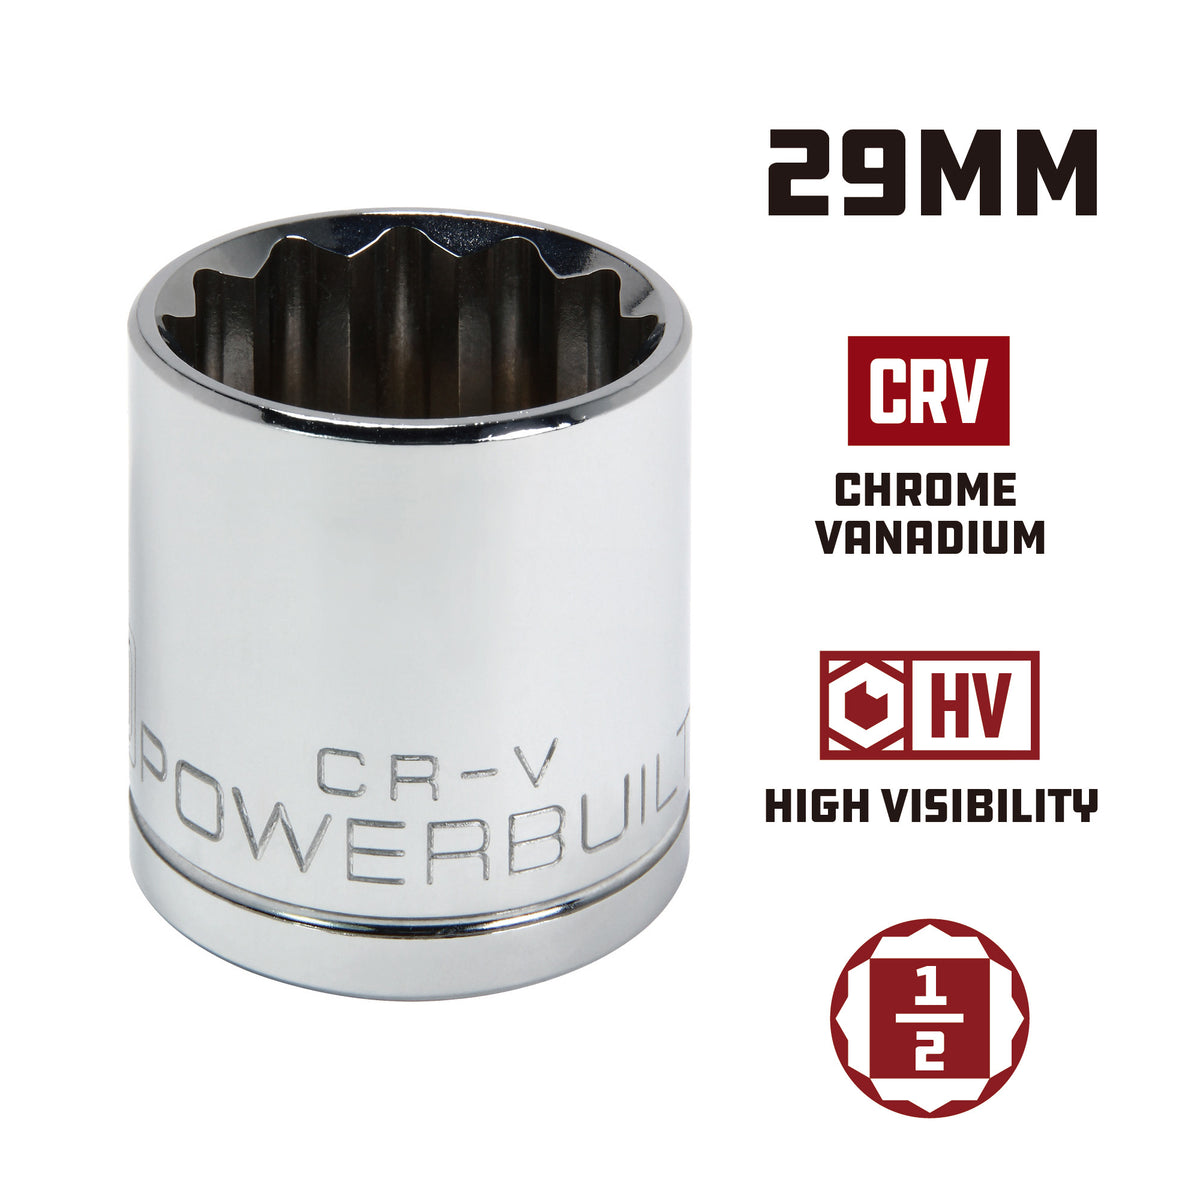 1/2 Inch Drive x 29 MM 12 Point Shallow Socket